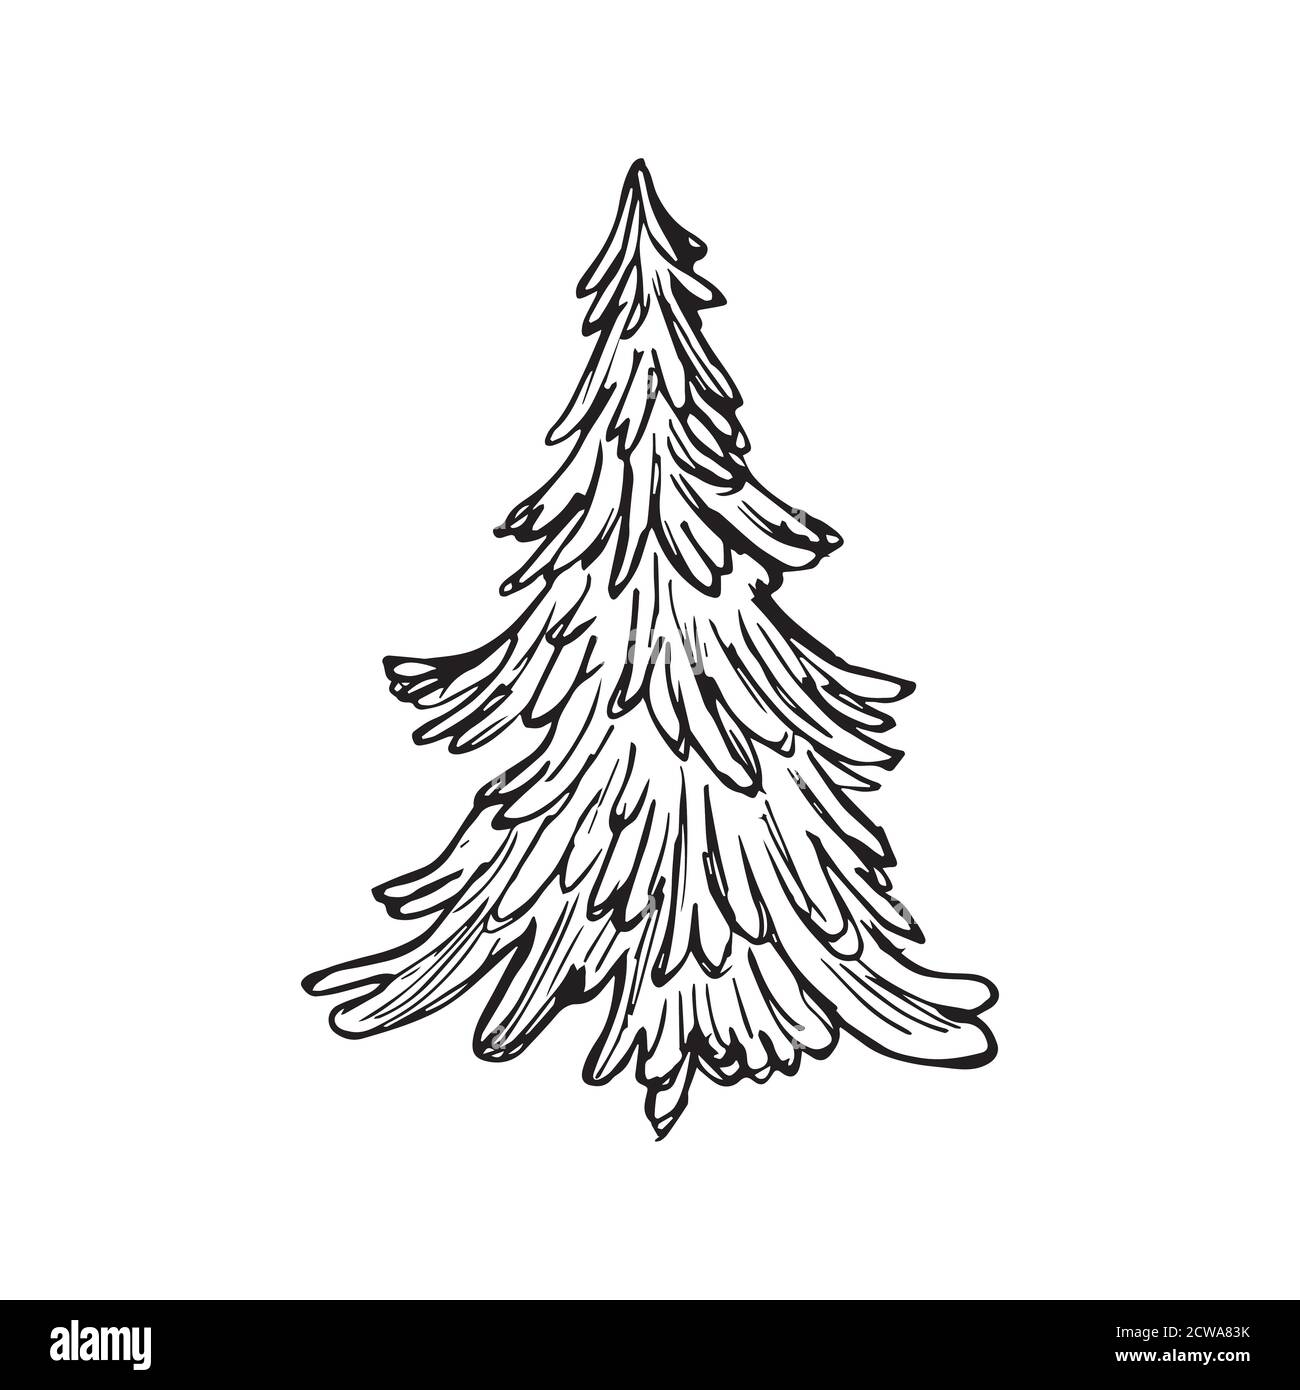 Vector Hand Drawn Sketch Pine Tree. Christmas Tree Without Decoration.  Royalty Free SVG, Cliparts, Vectors, and Stock Illustration. Image  123324584.